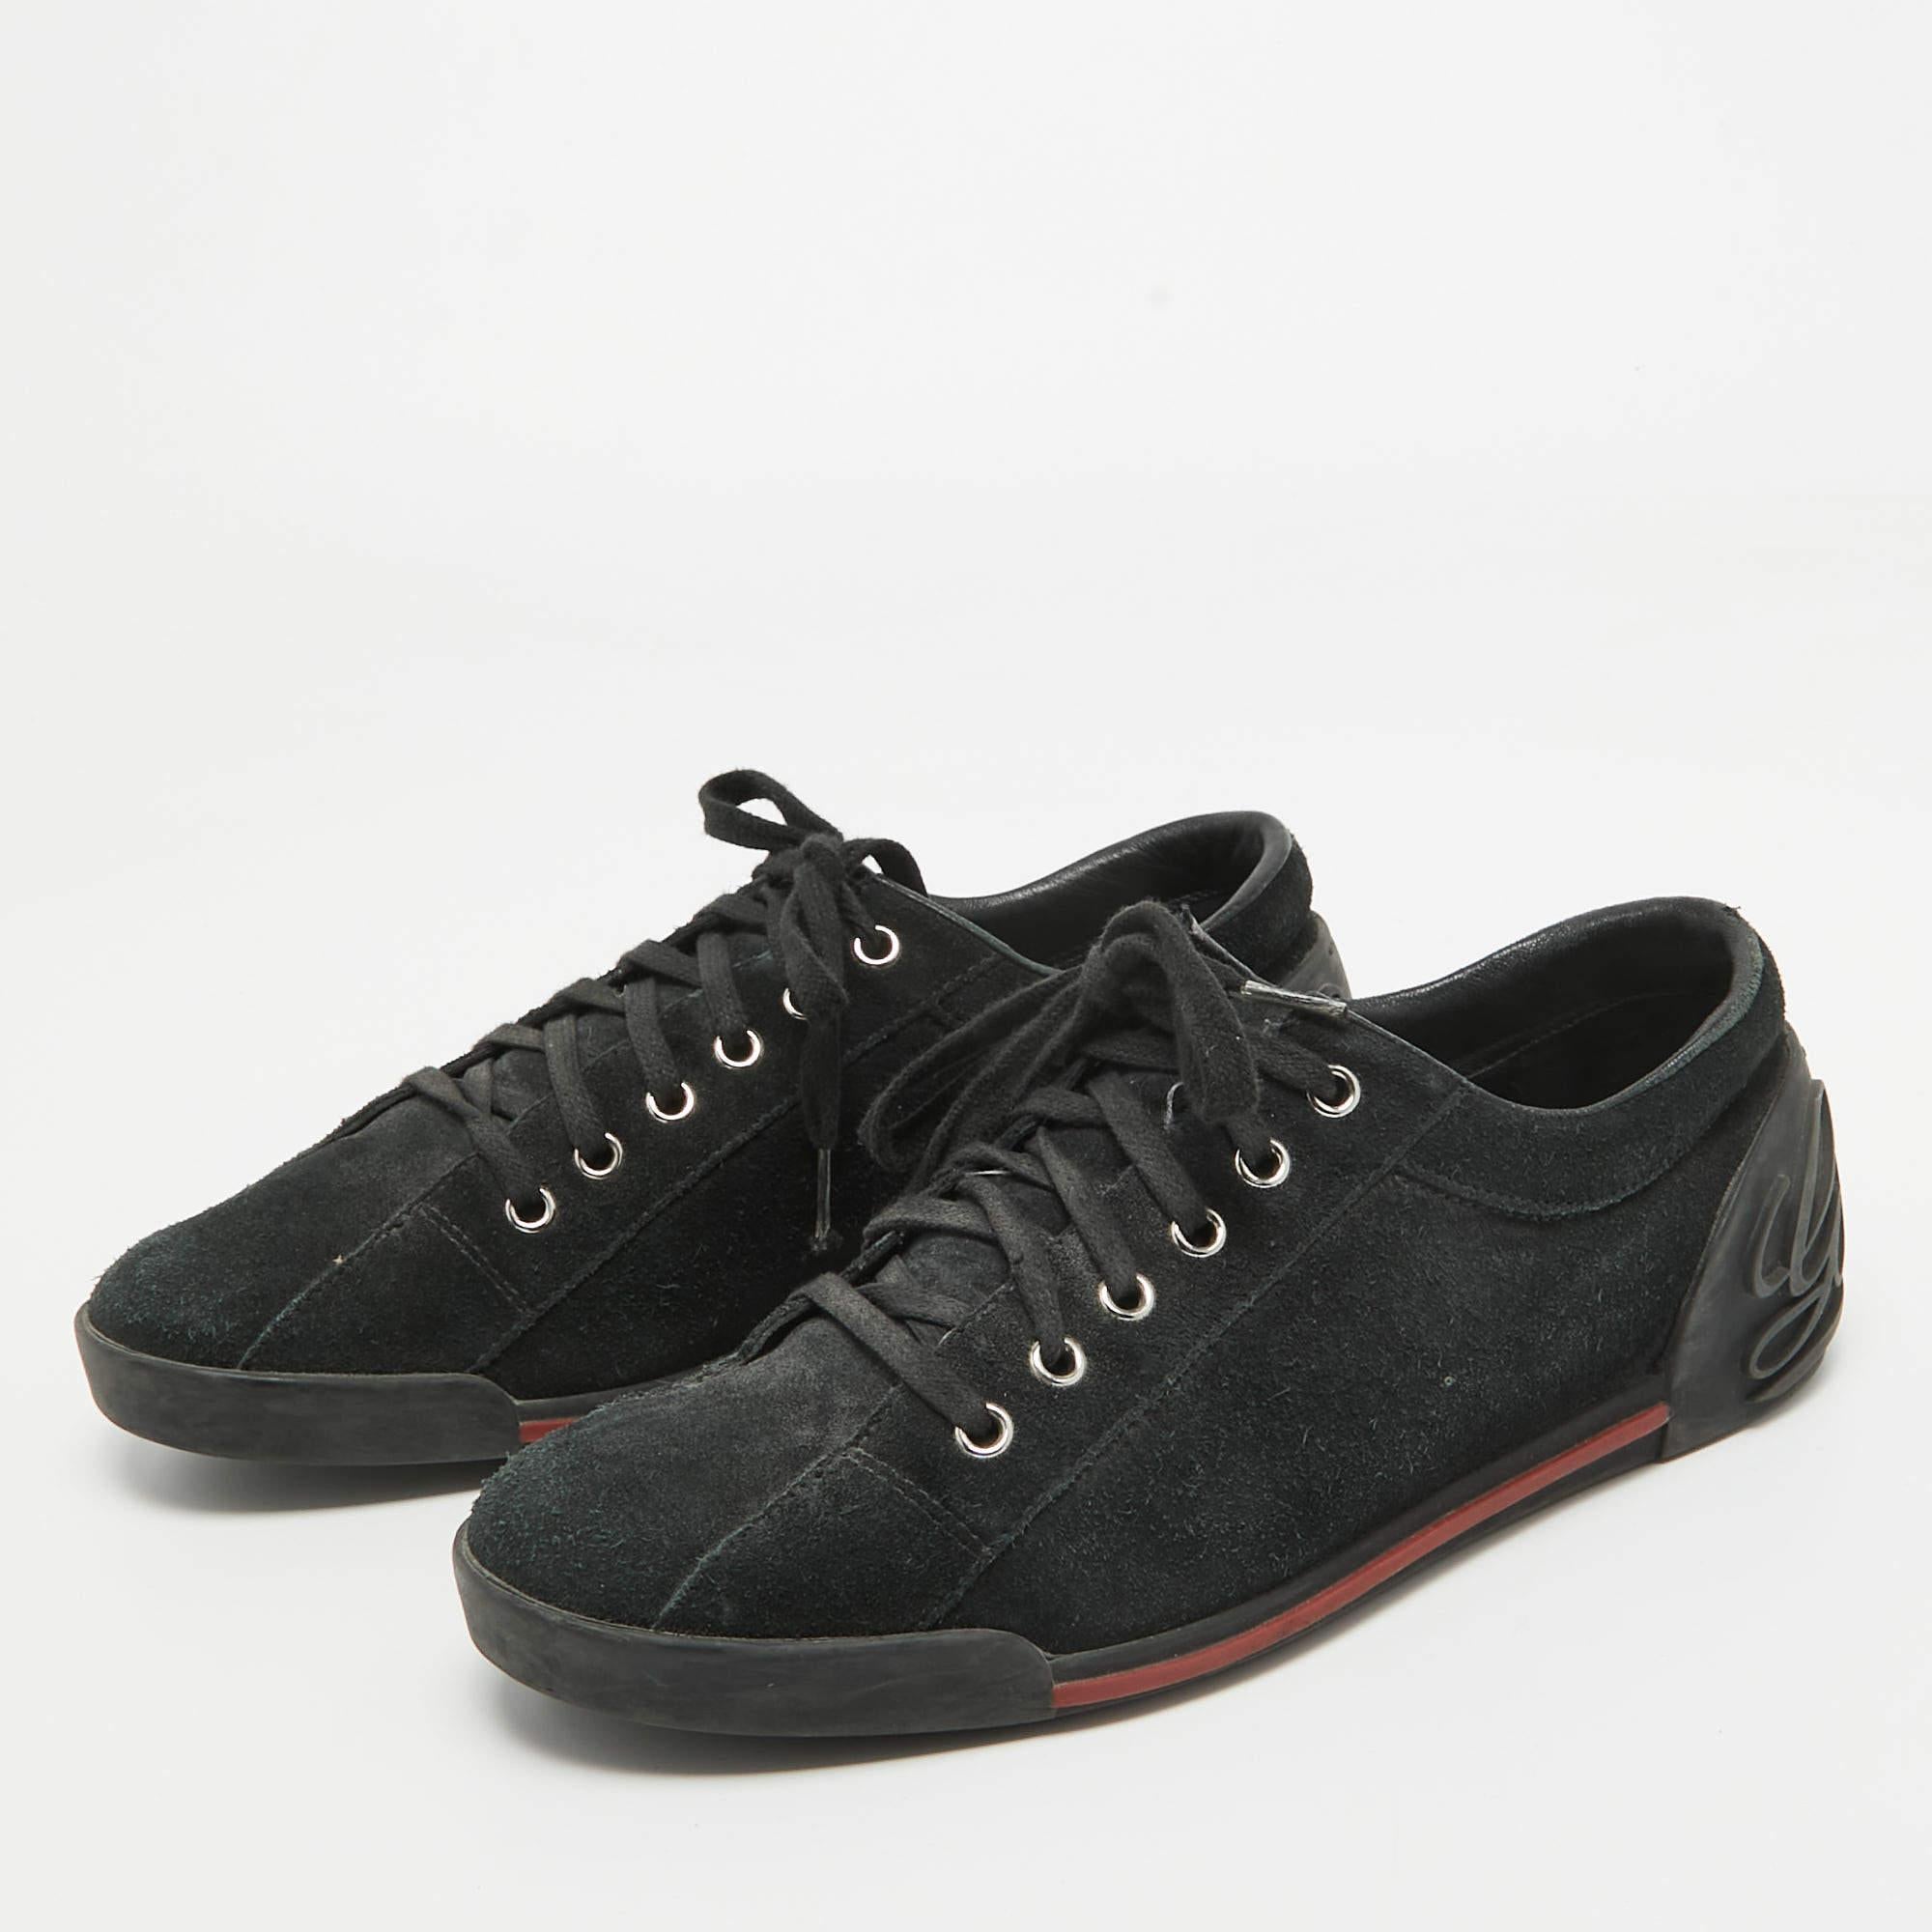 Gucci Black Suede Lace Up Sneakers Size 38 For Sale 1